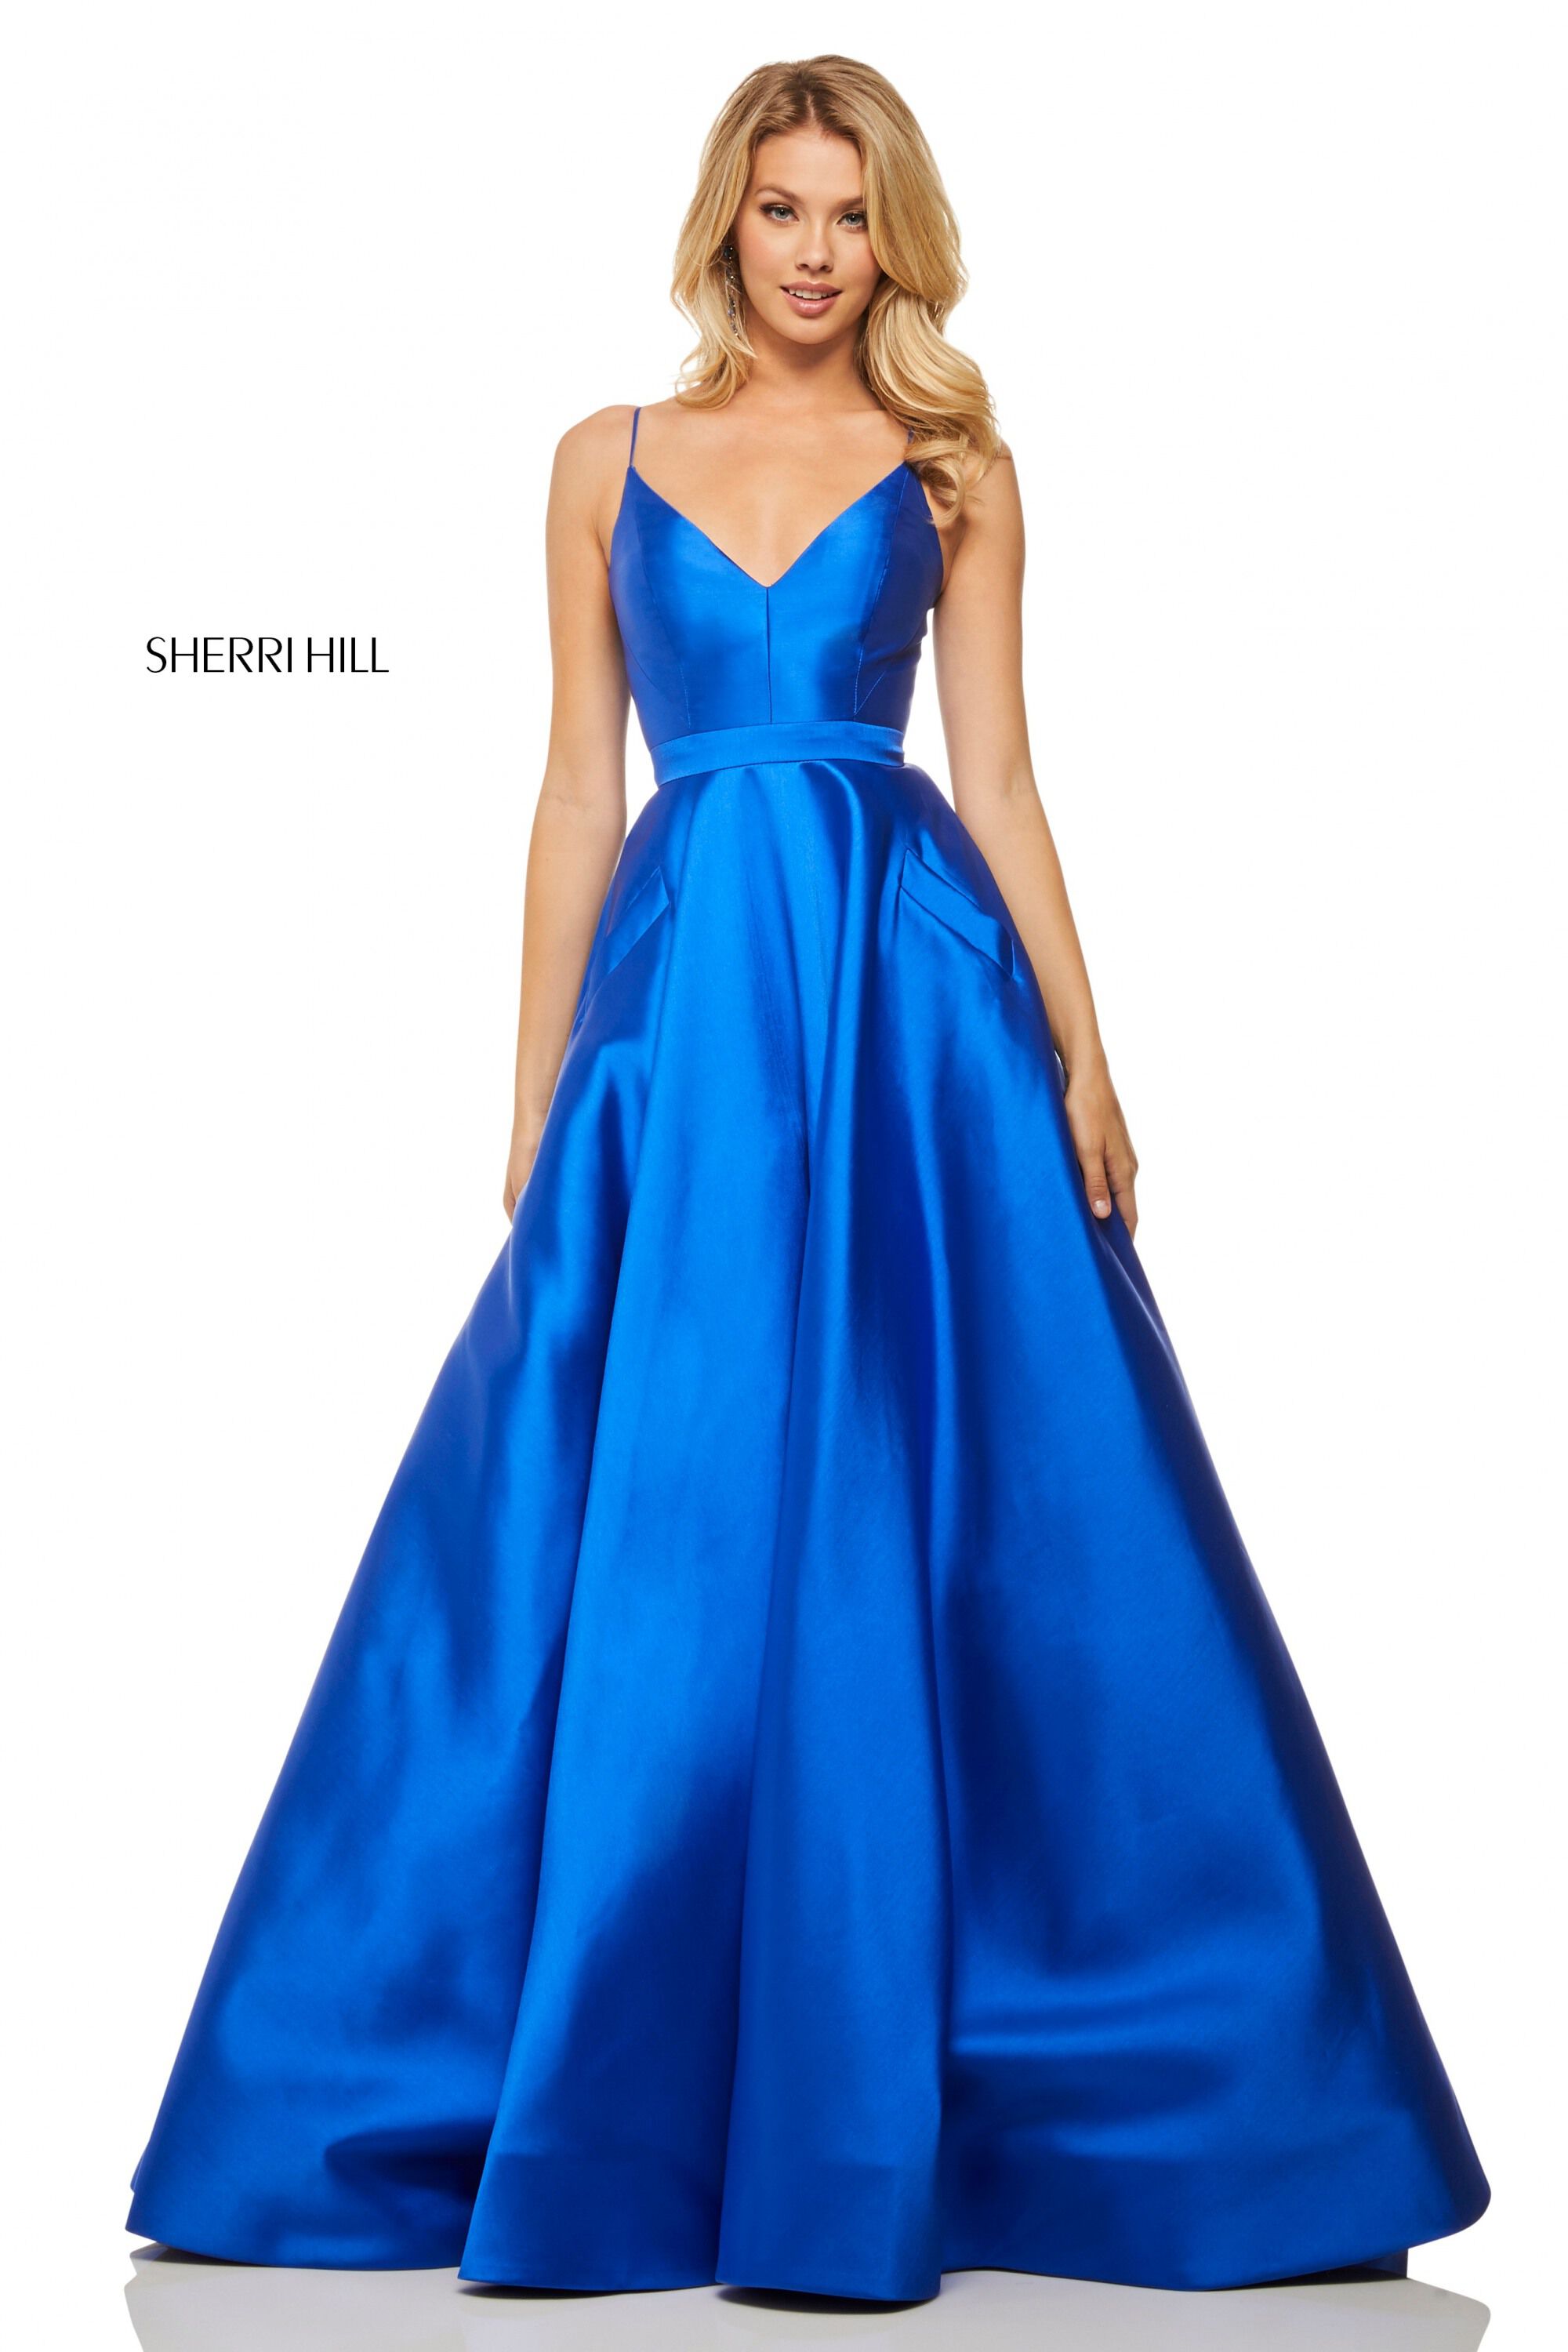 style № 52821 designed by SherriHill